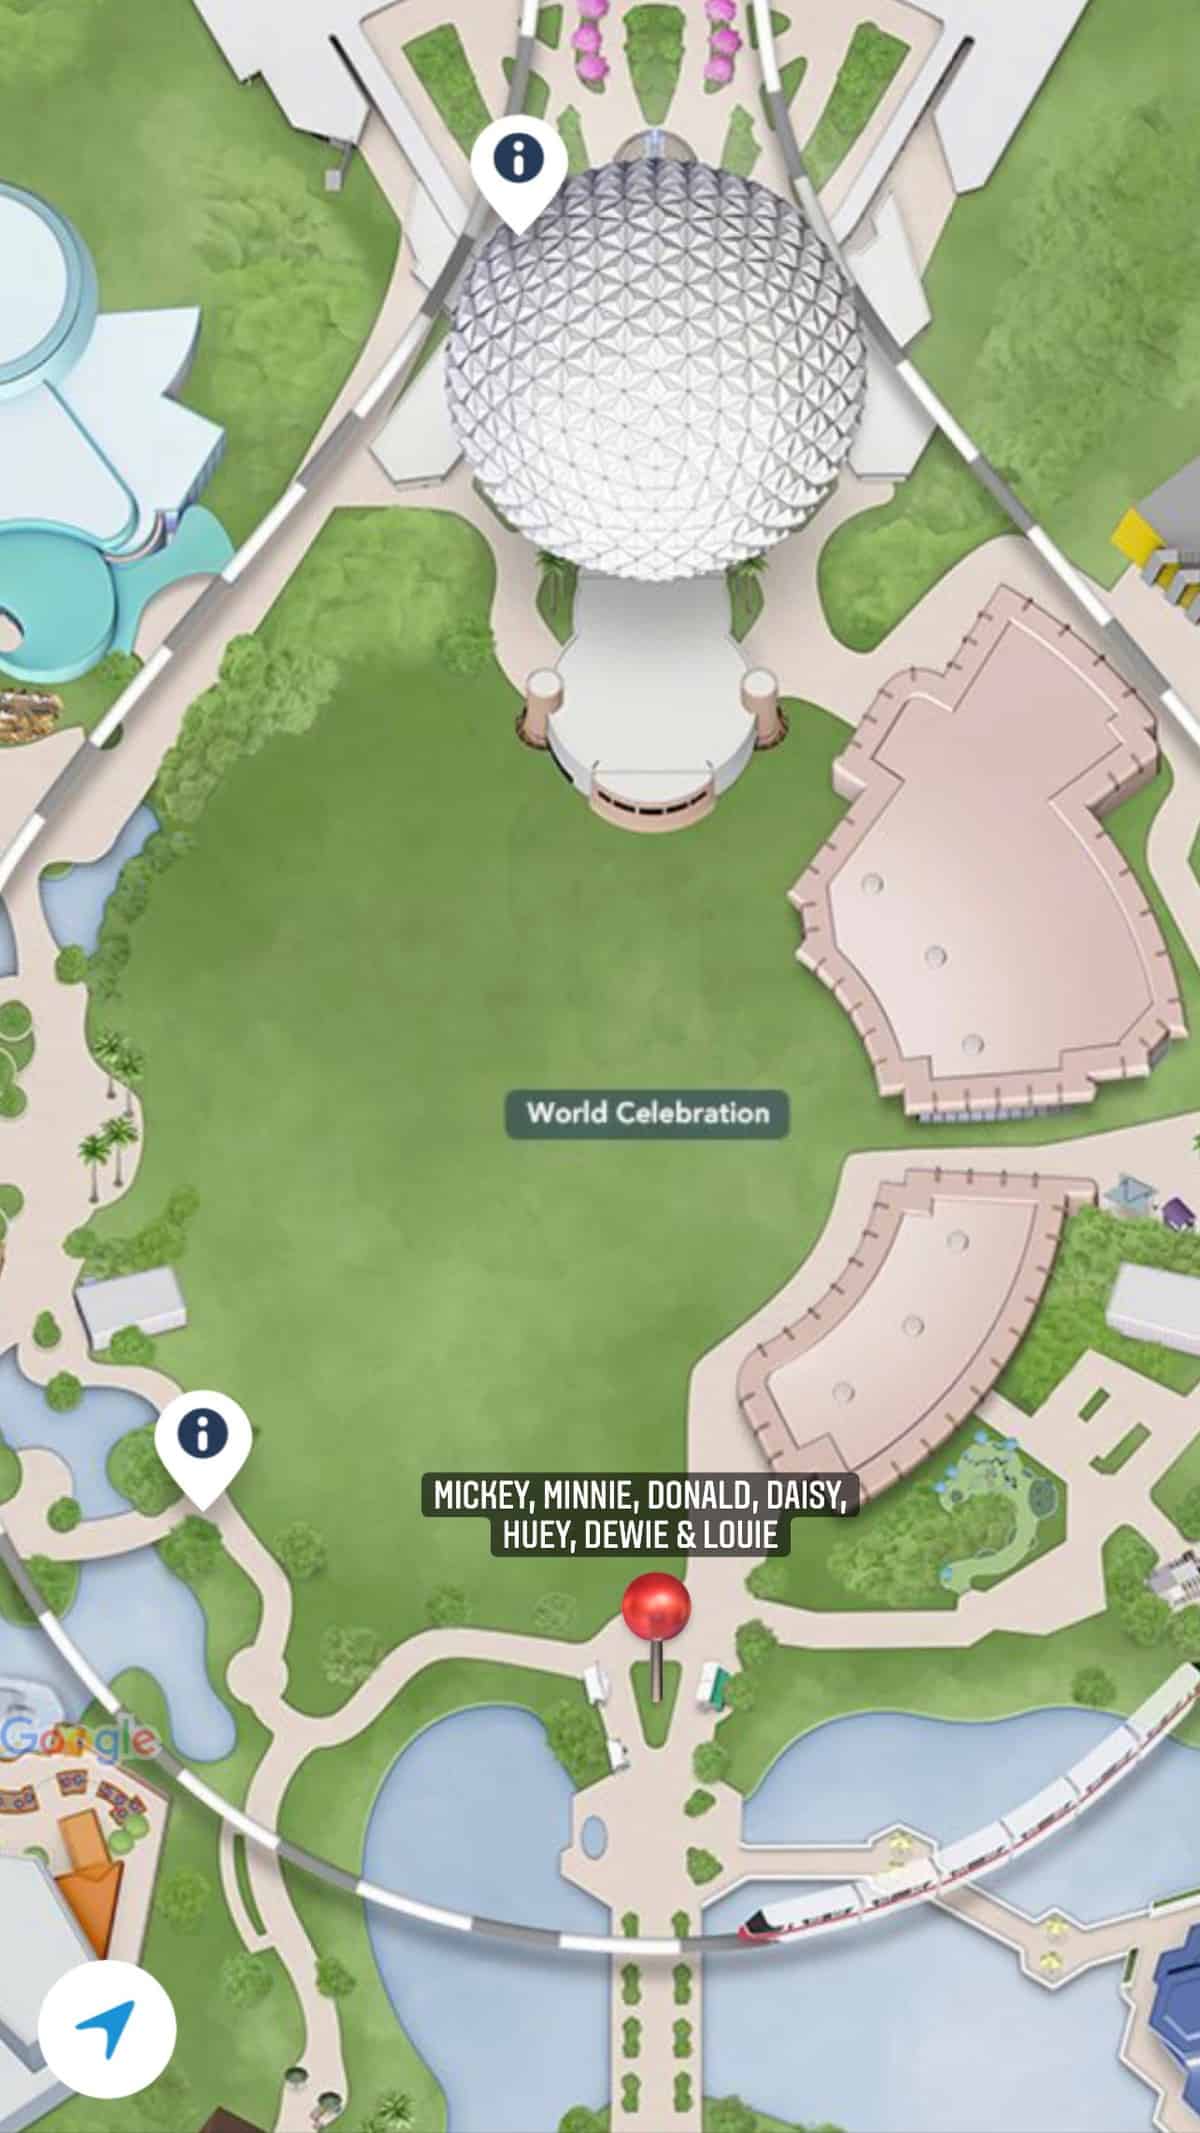 Epcot 2022 Flower and Garden Festival - Mickey Minnie Donald Daisy topiary map